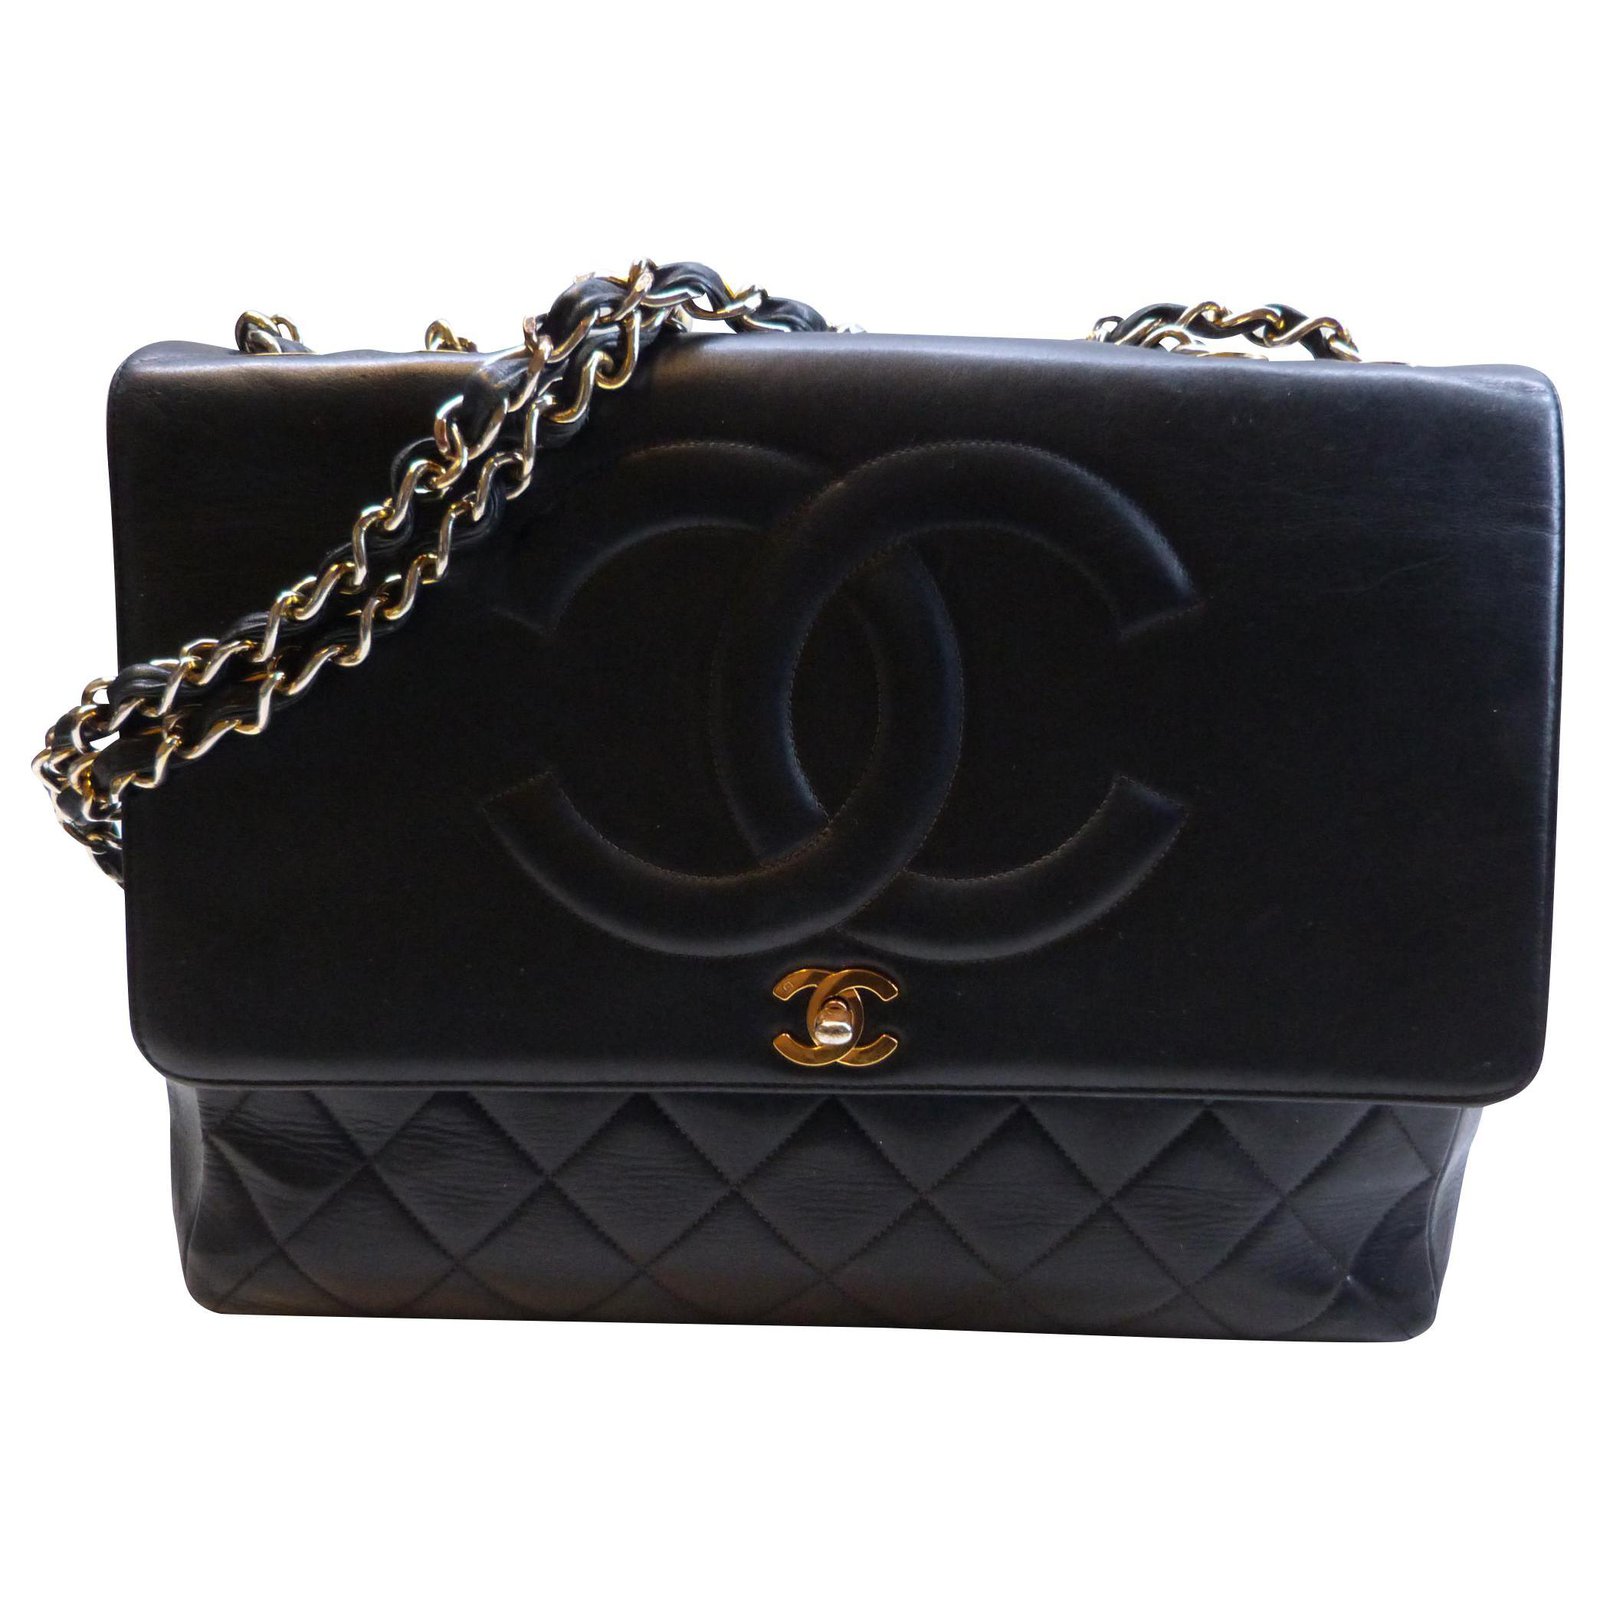 Chanel Vintage Square Flap Bag in Black Lambskin with Gold Hardware  SOLD